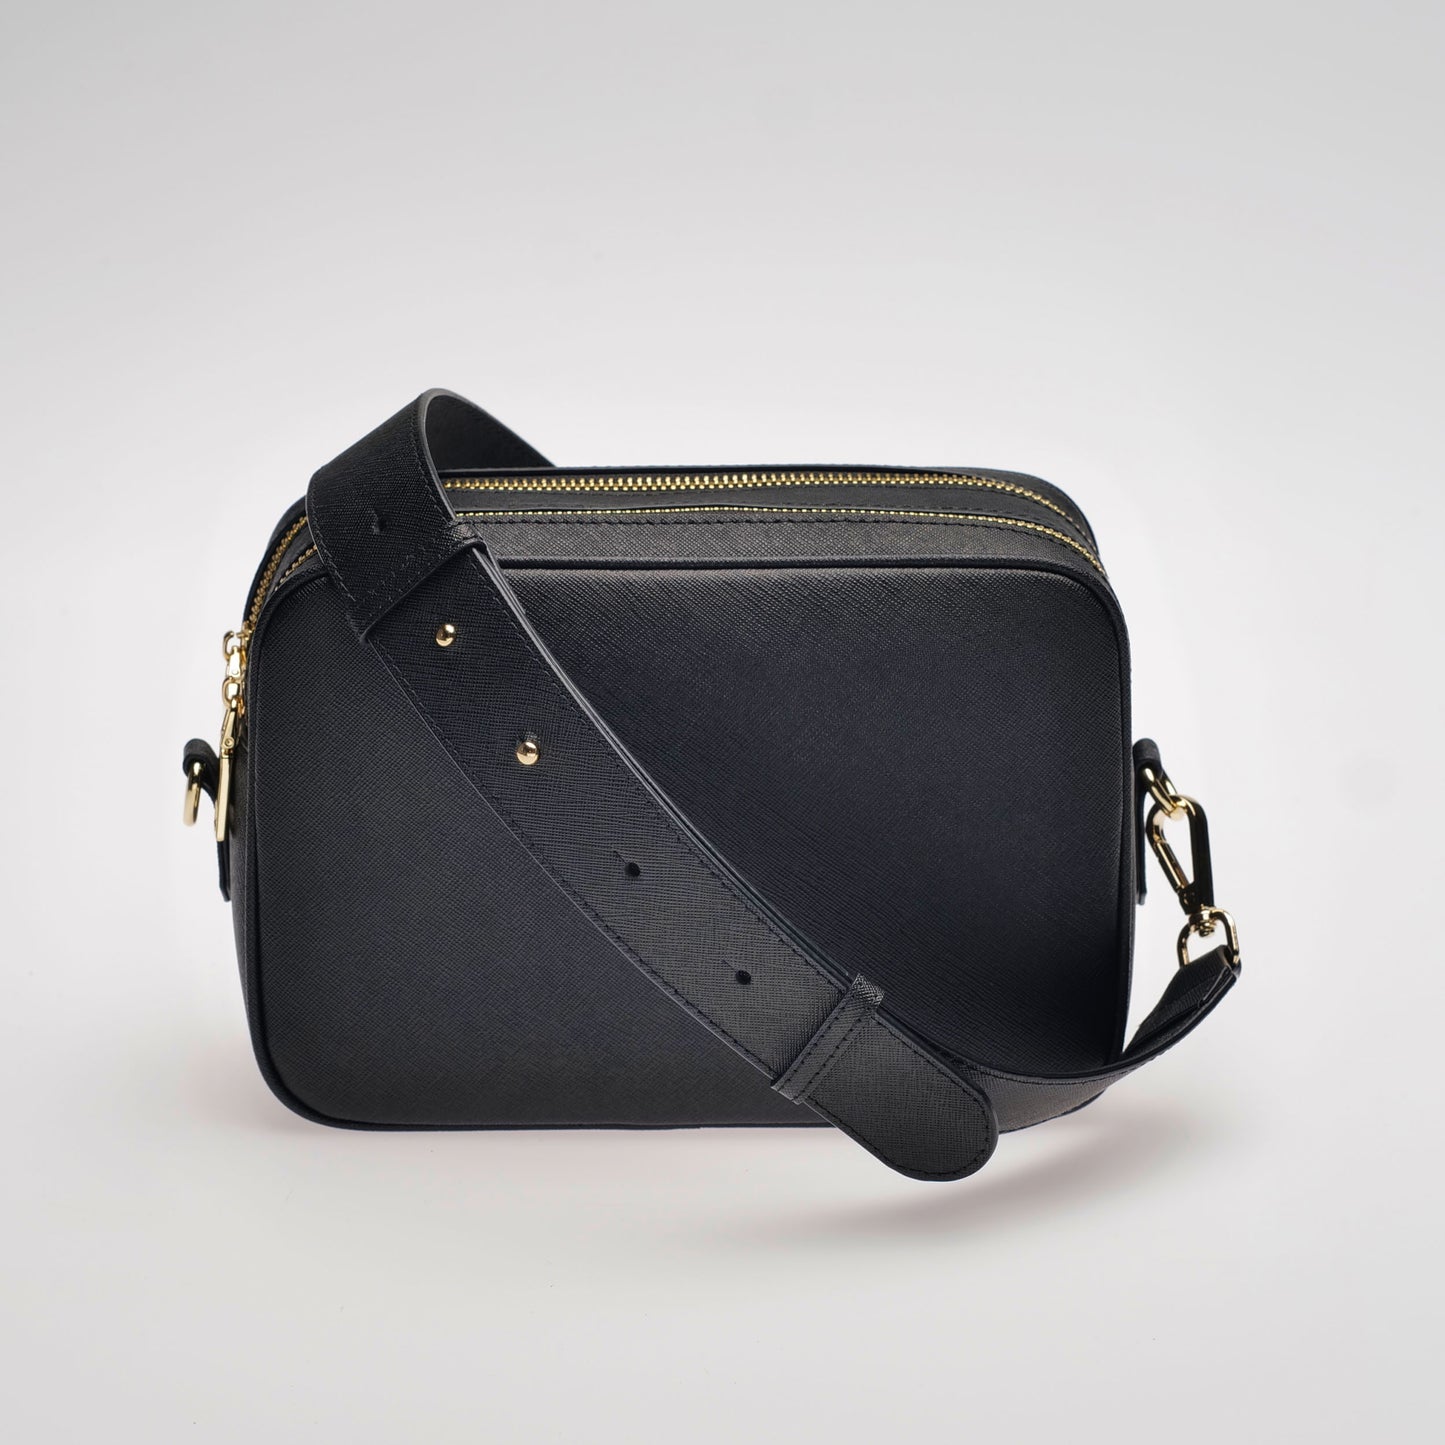 James Saffiano Leather Crossbody Bag by Swoon London in Midnight Black